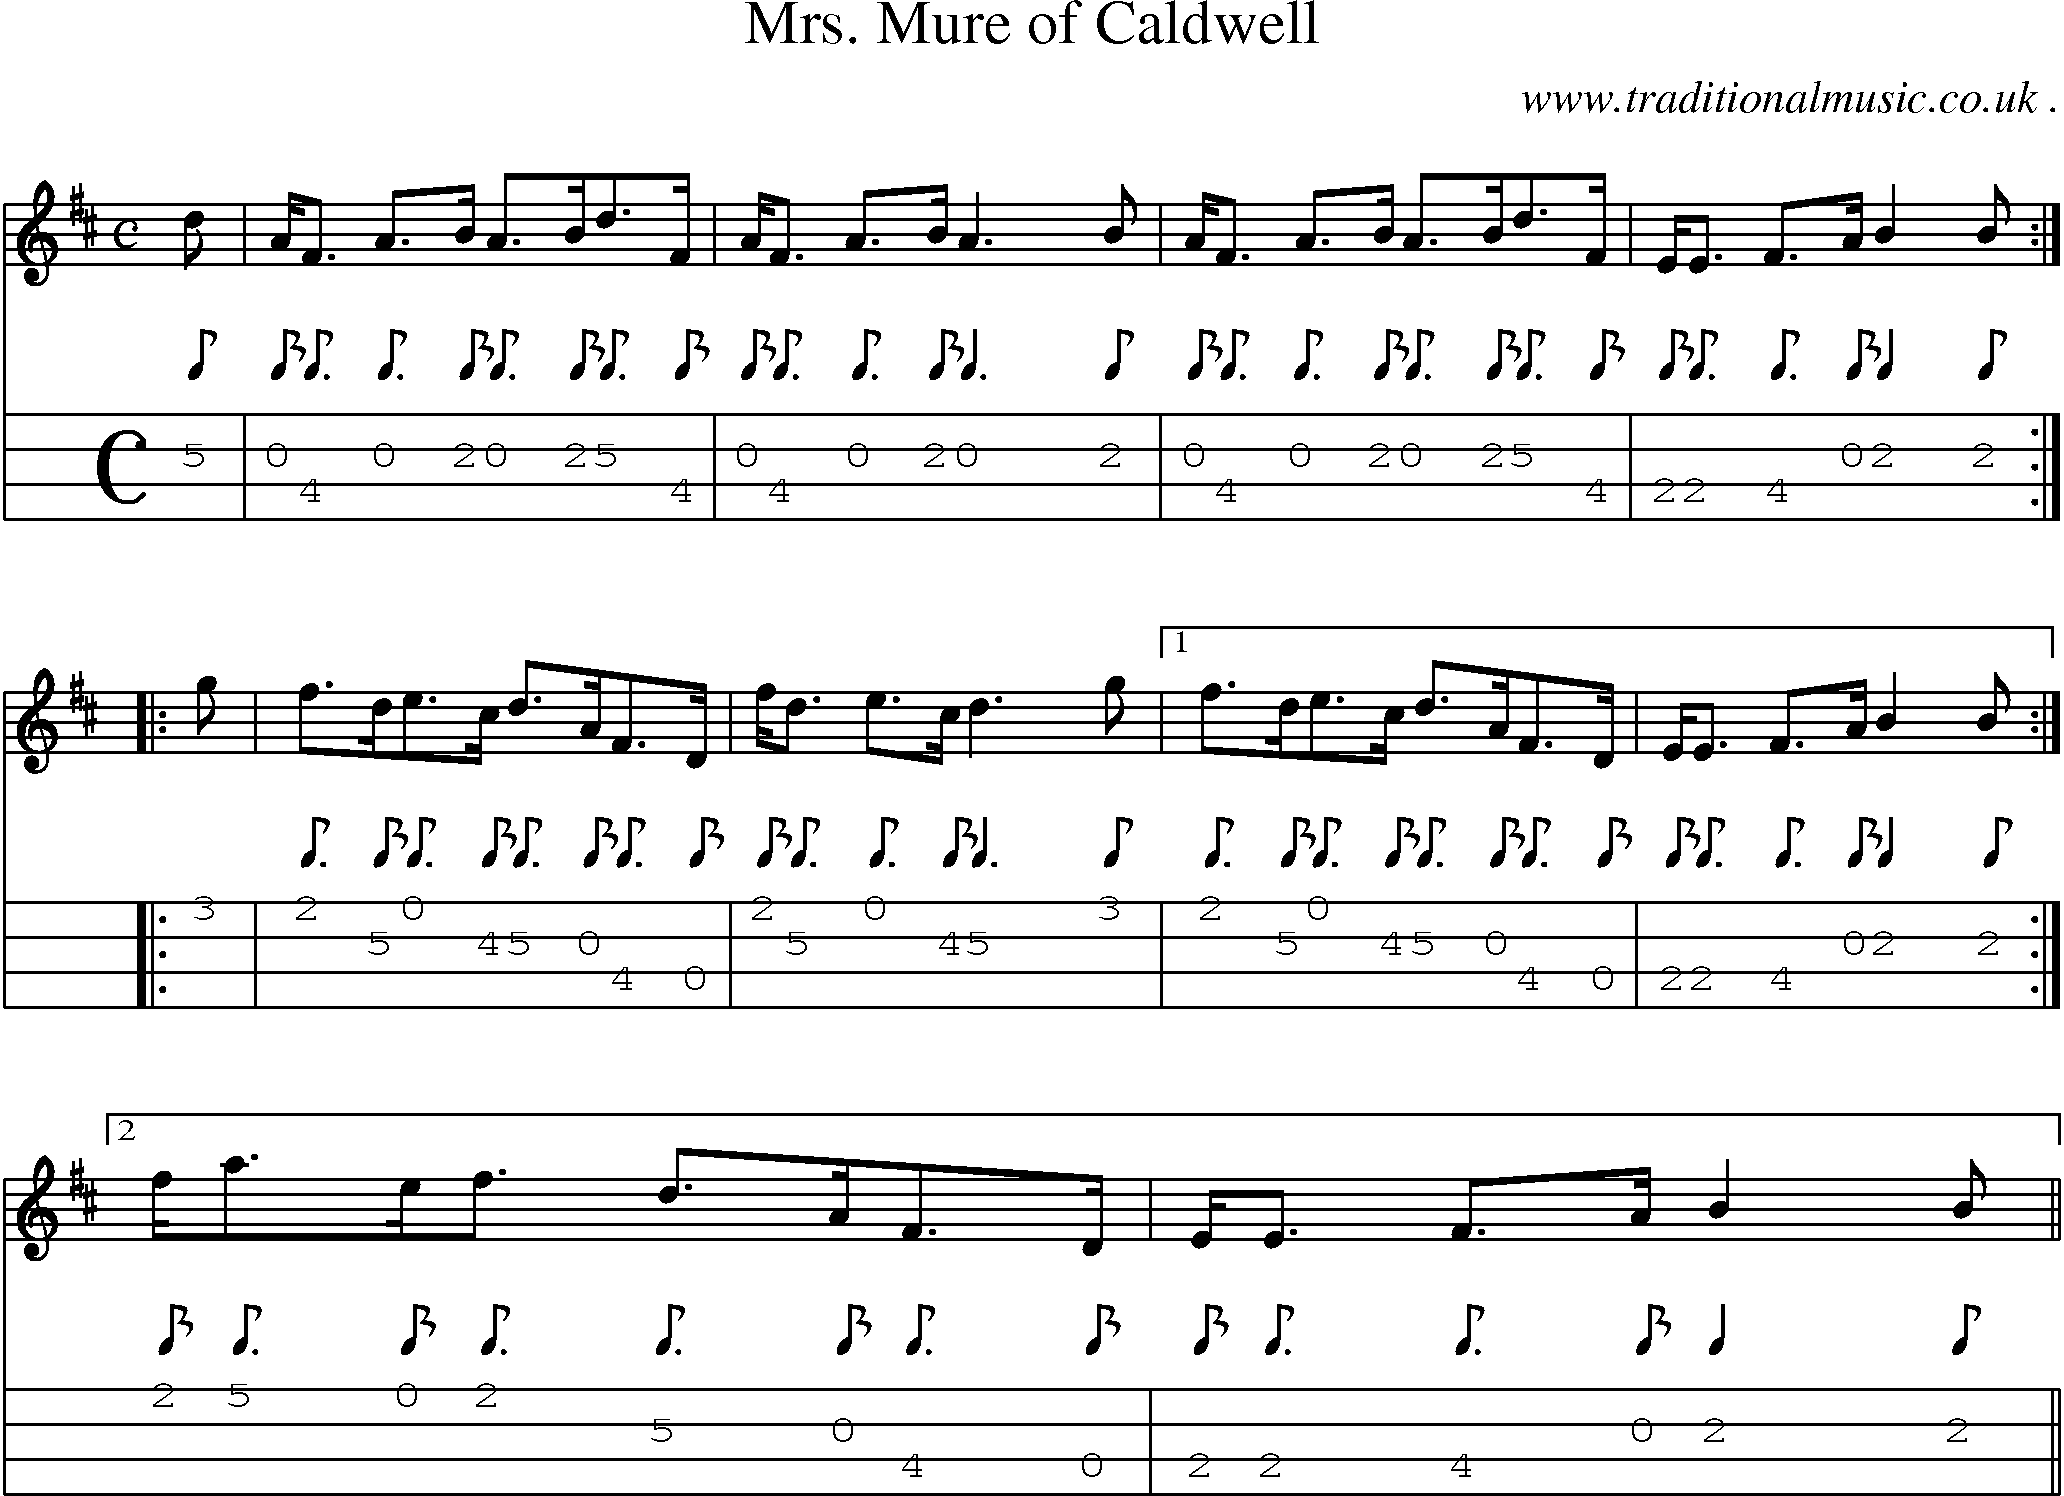 Sheet-music  score, Chords and Mandolin Tabs for Mrs Mure Of Caldwell